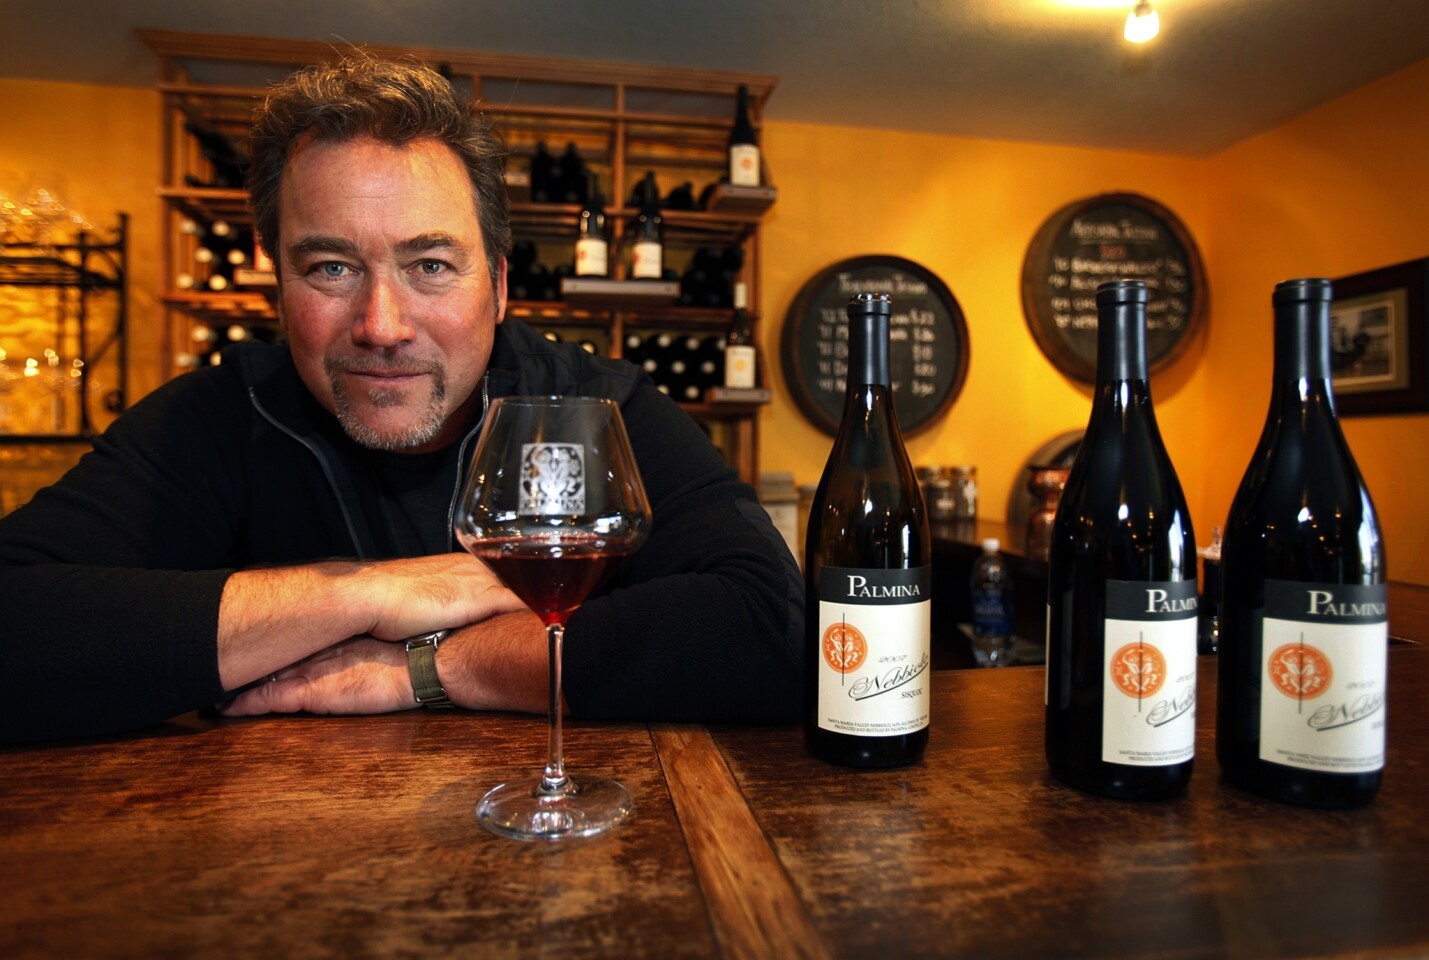 Steve Clifton, winemaker and owner of Palmina Vineyards, in his Lompoc tasting room with his 2007 Nebbiolo wines. He produces a full range of wines crafted from Italian varietals grown in Santa Barbara County.